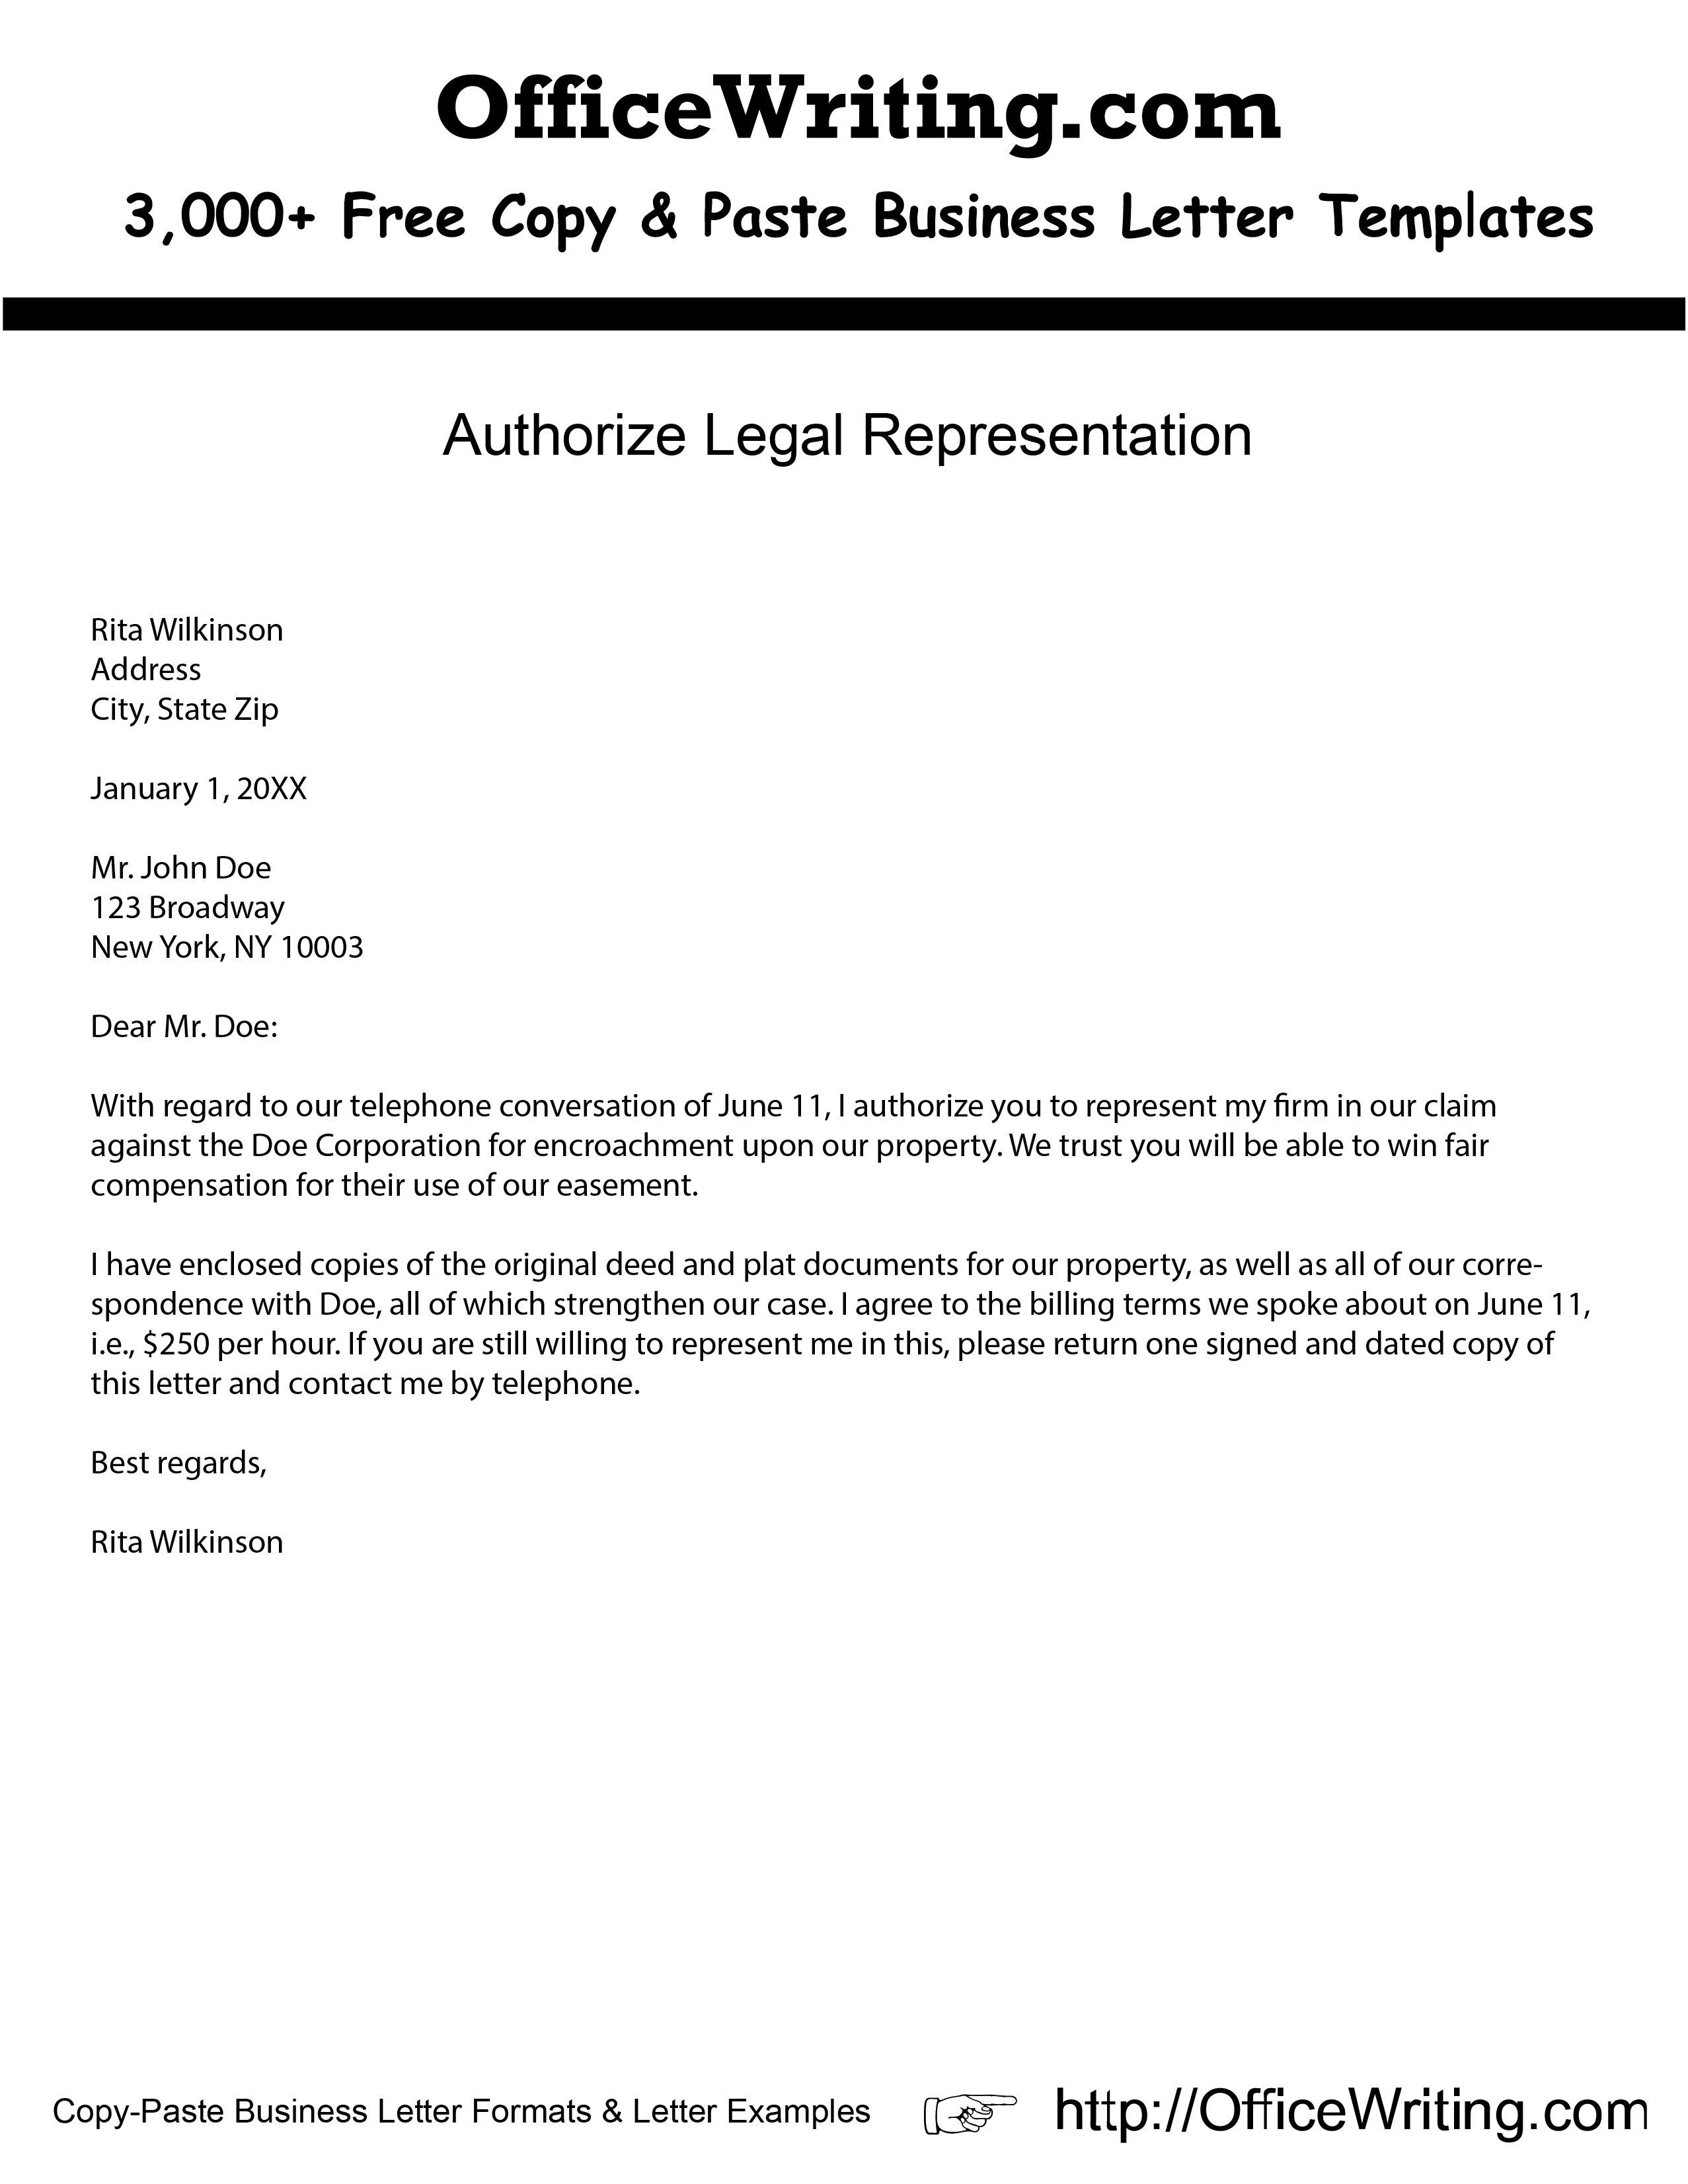 Authorize Legal Representation - Download FREE Business Letter